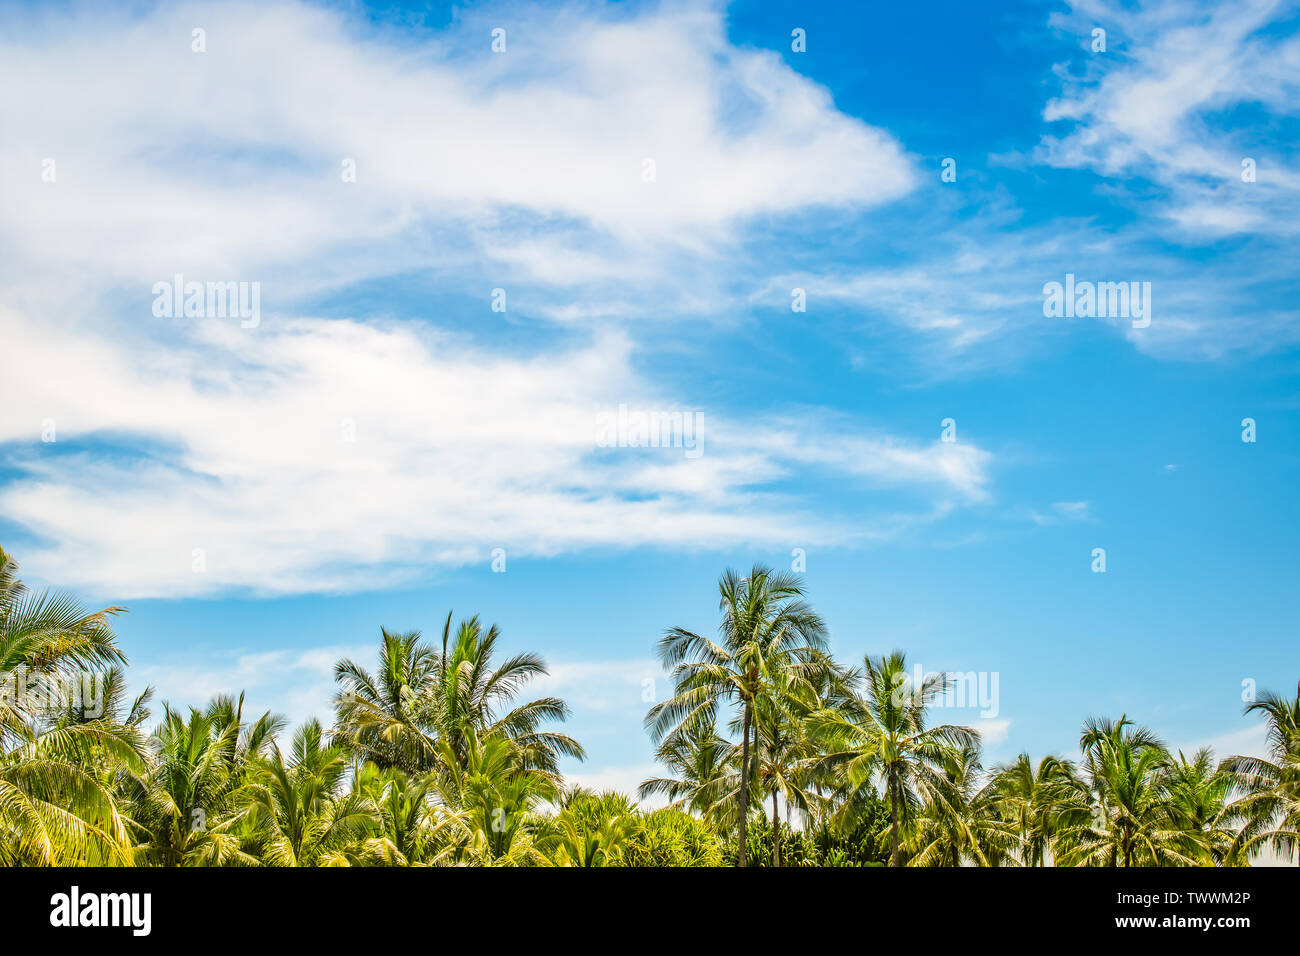 Tropical beach summer background with coconut palm trees against blue sky and white clouds. Space for text. Stock Photo